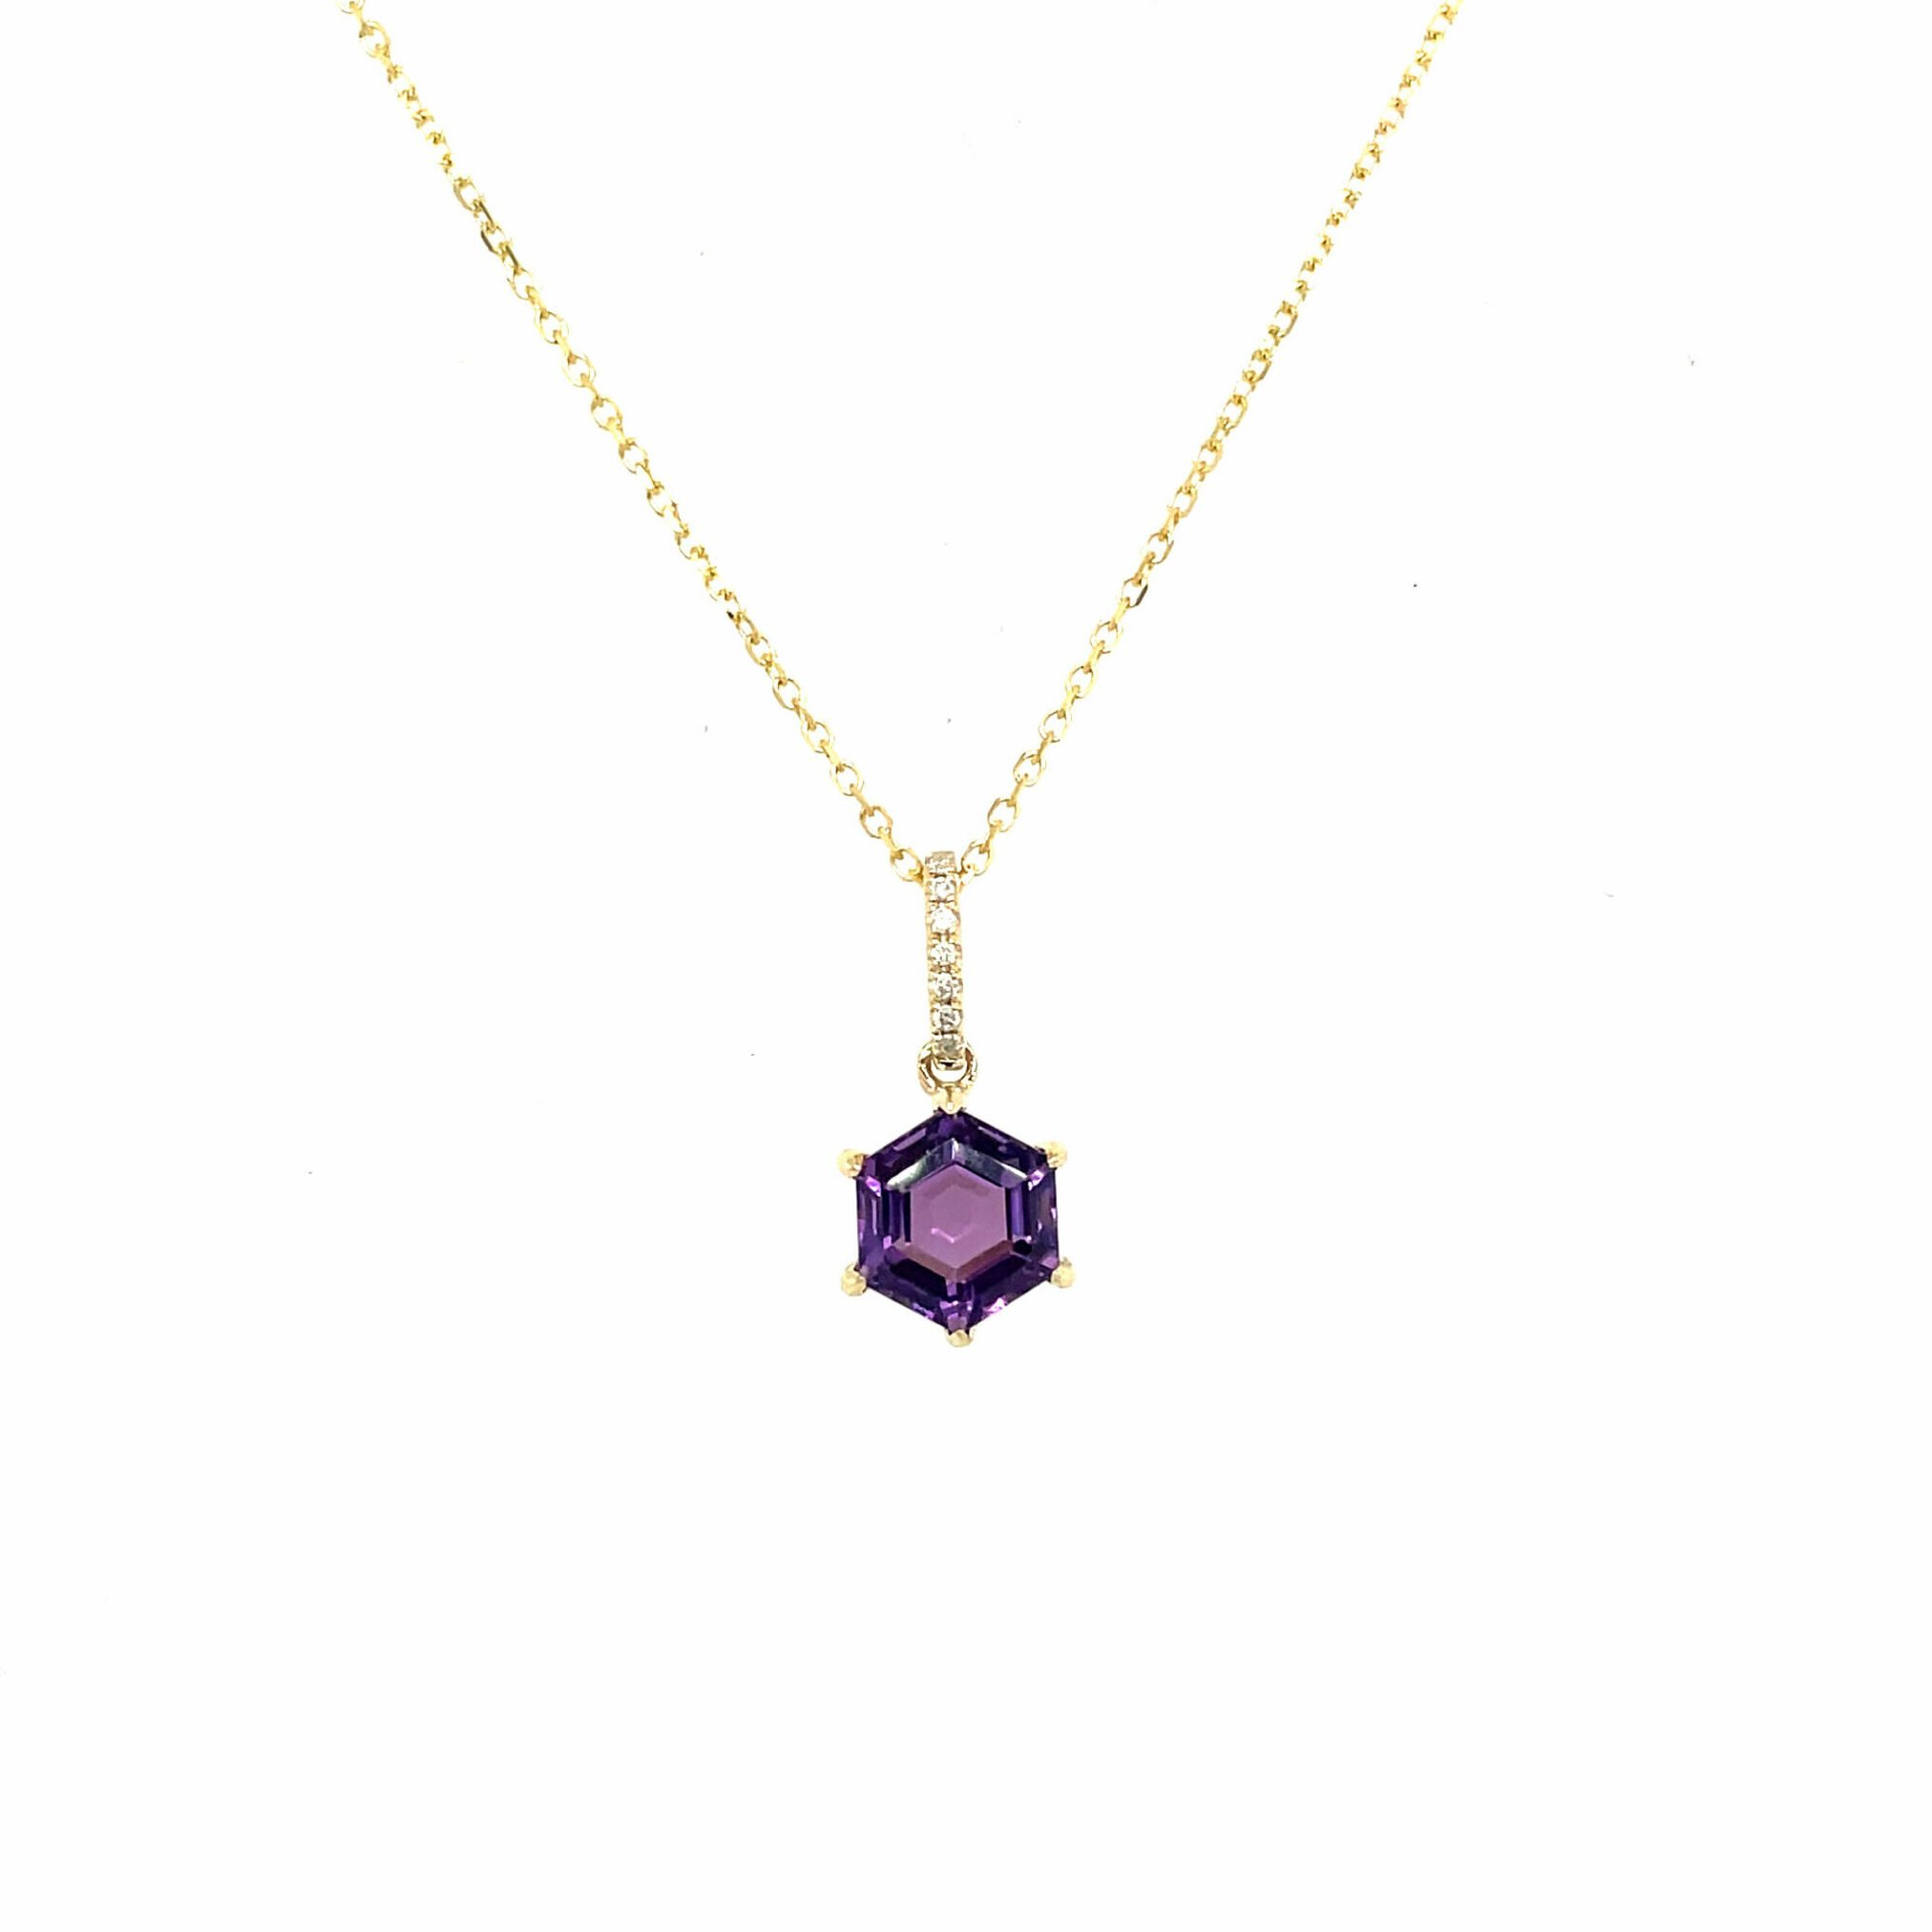 Yellow Gold Hexagonal Amethyst and Diamond Necklace